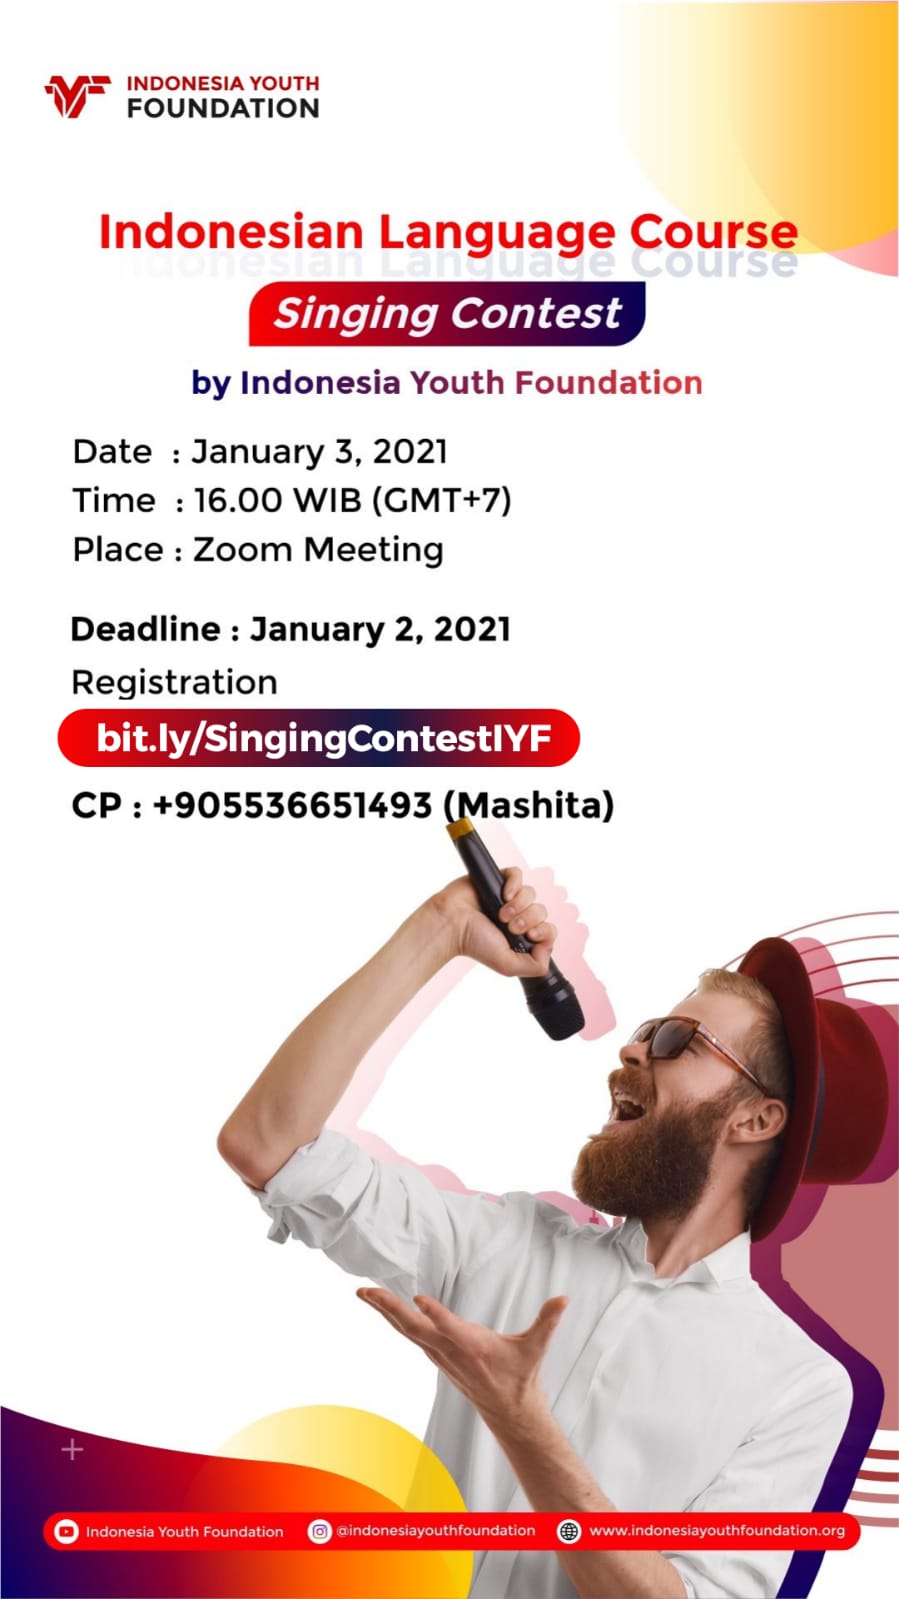 Singing contest by indonesian youth foundation